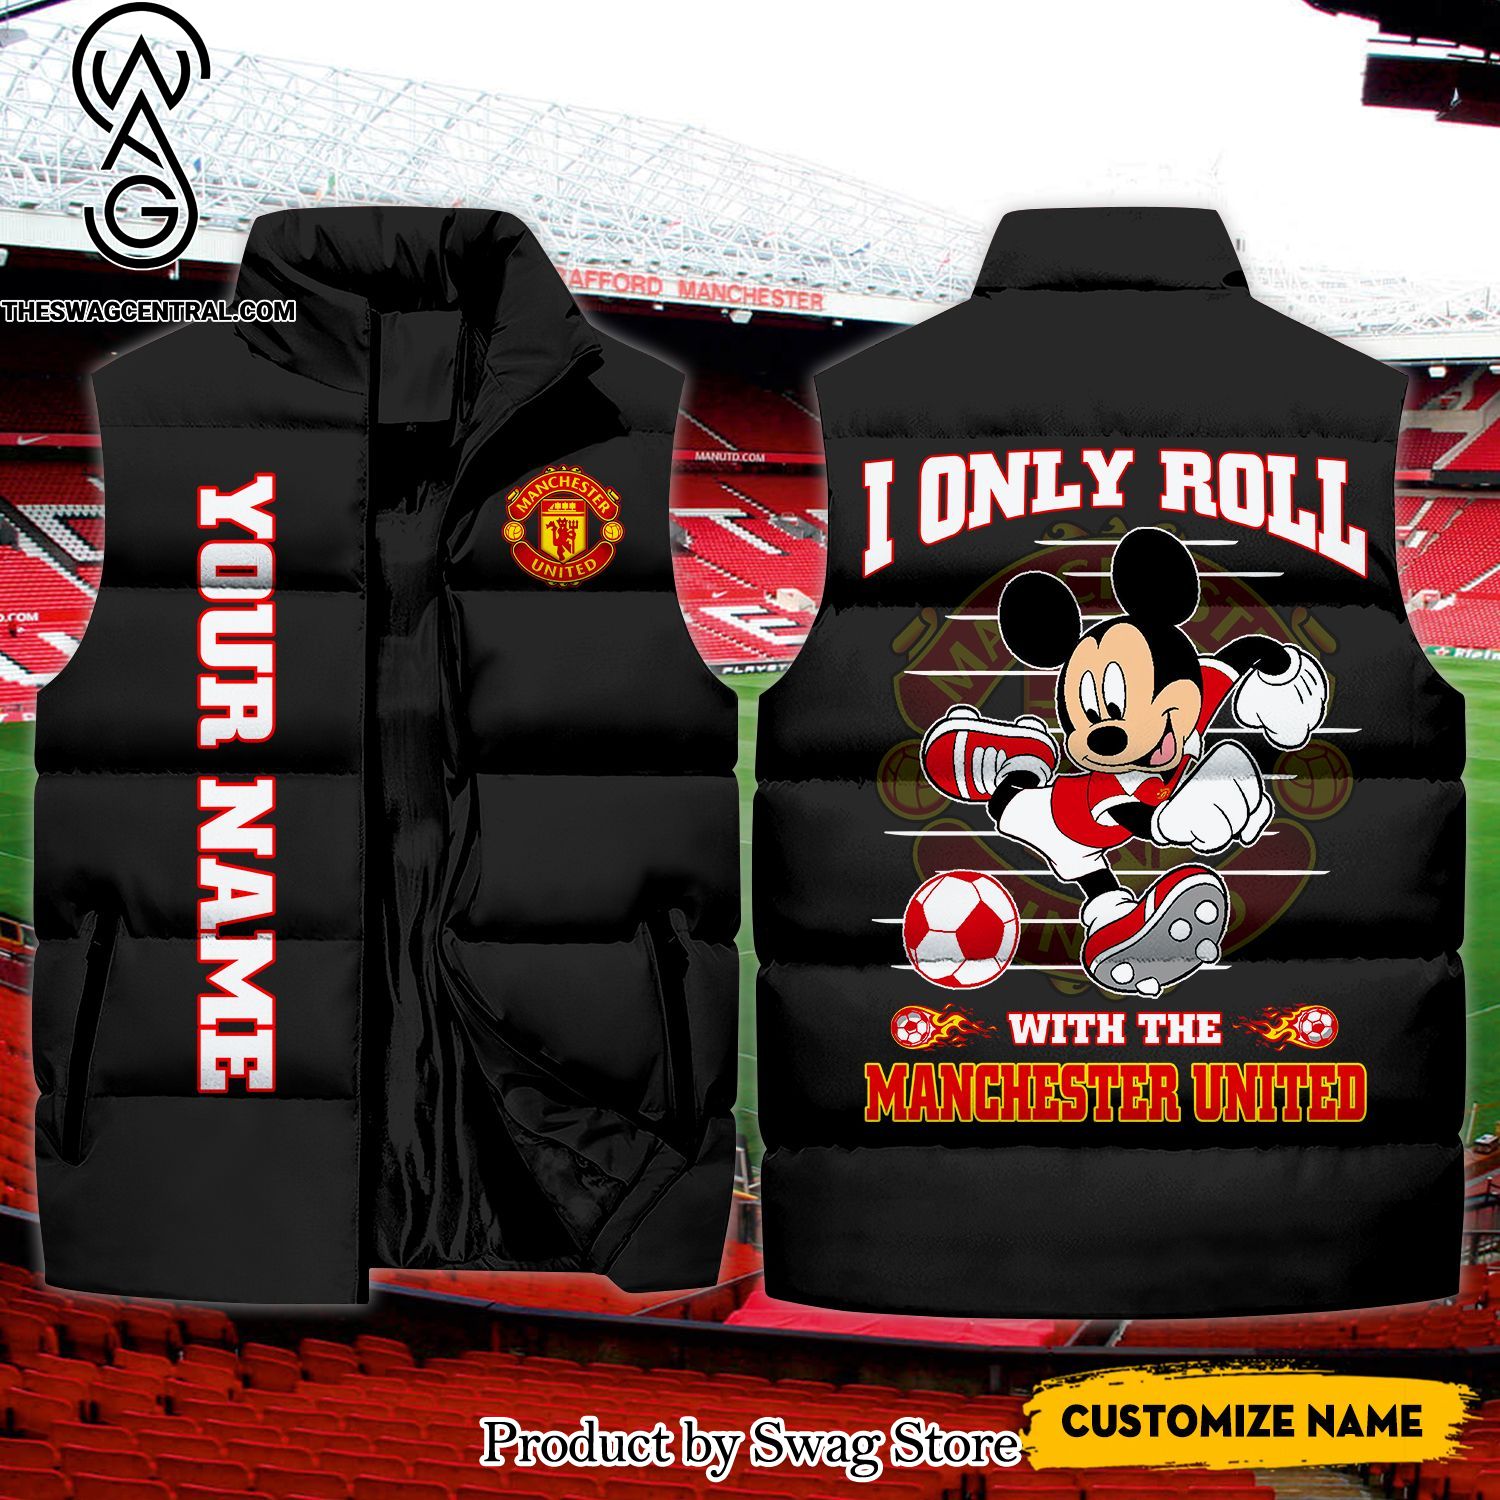 English Premier League I Only Roll With The Manchester United Unisex Sleeveless Jacket